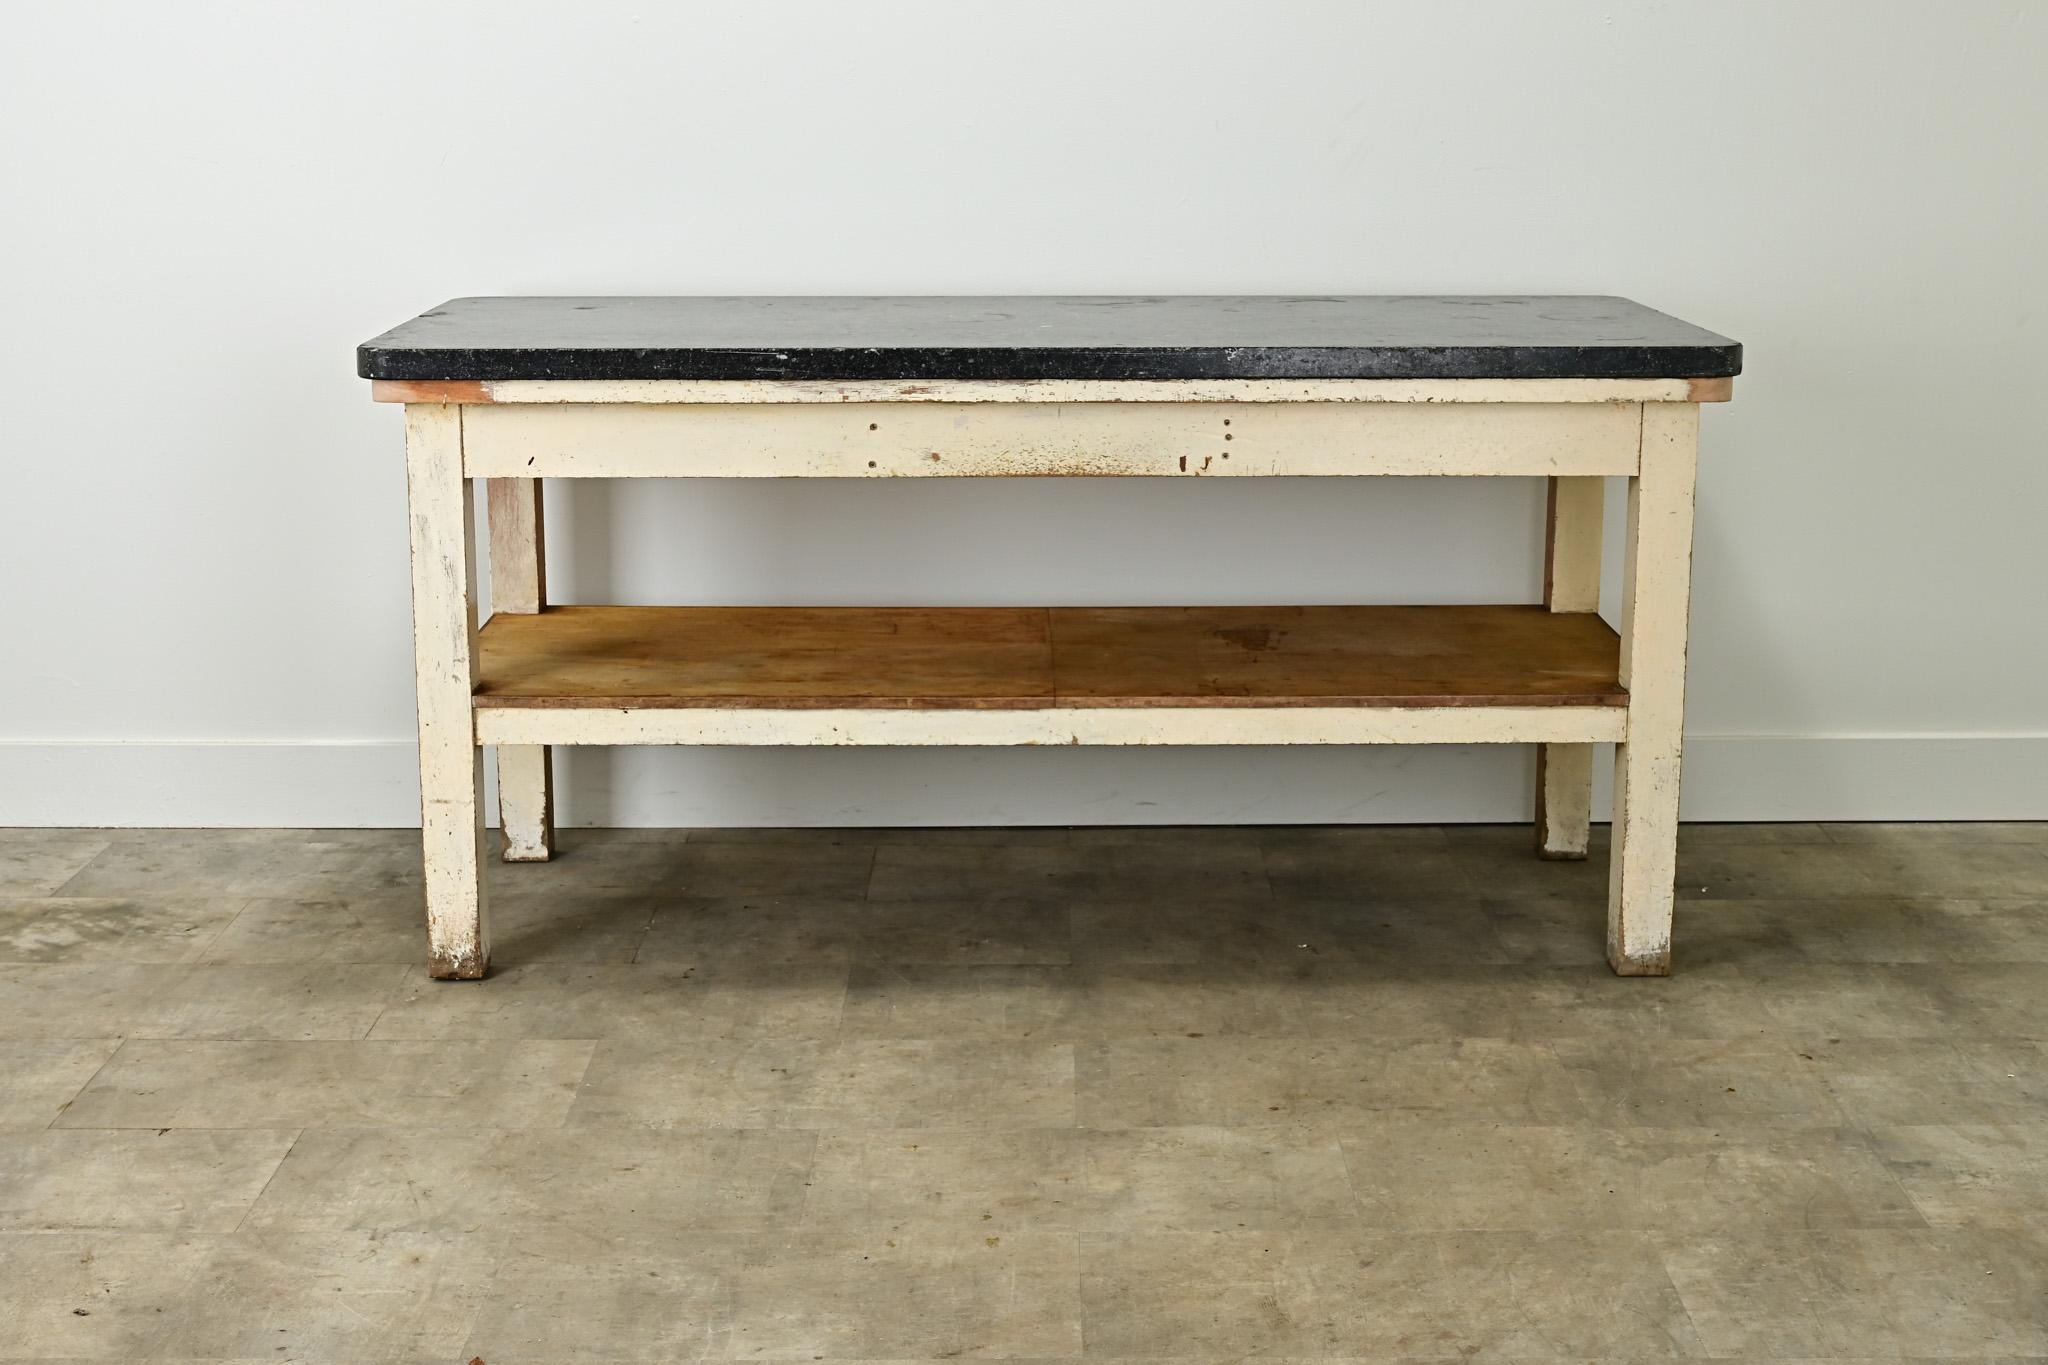 A unique table perfect for a kitchen island. The antique Belgian bluestone slab is 1 ½” thick and is worn with age and patina. The table’s base is made of partially painted pine with four square legs with a storage shelf. It’s likely the stone top